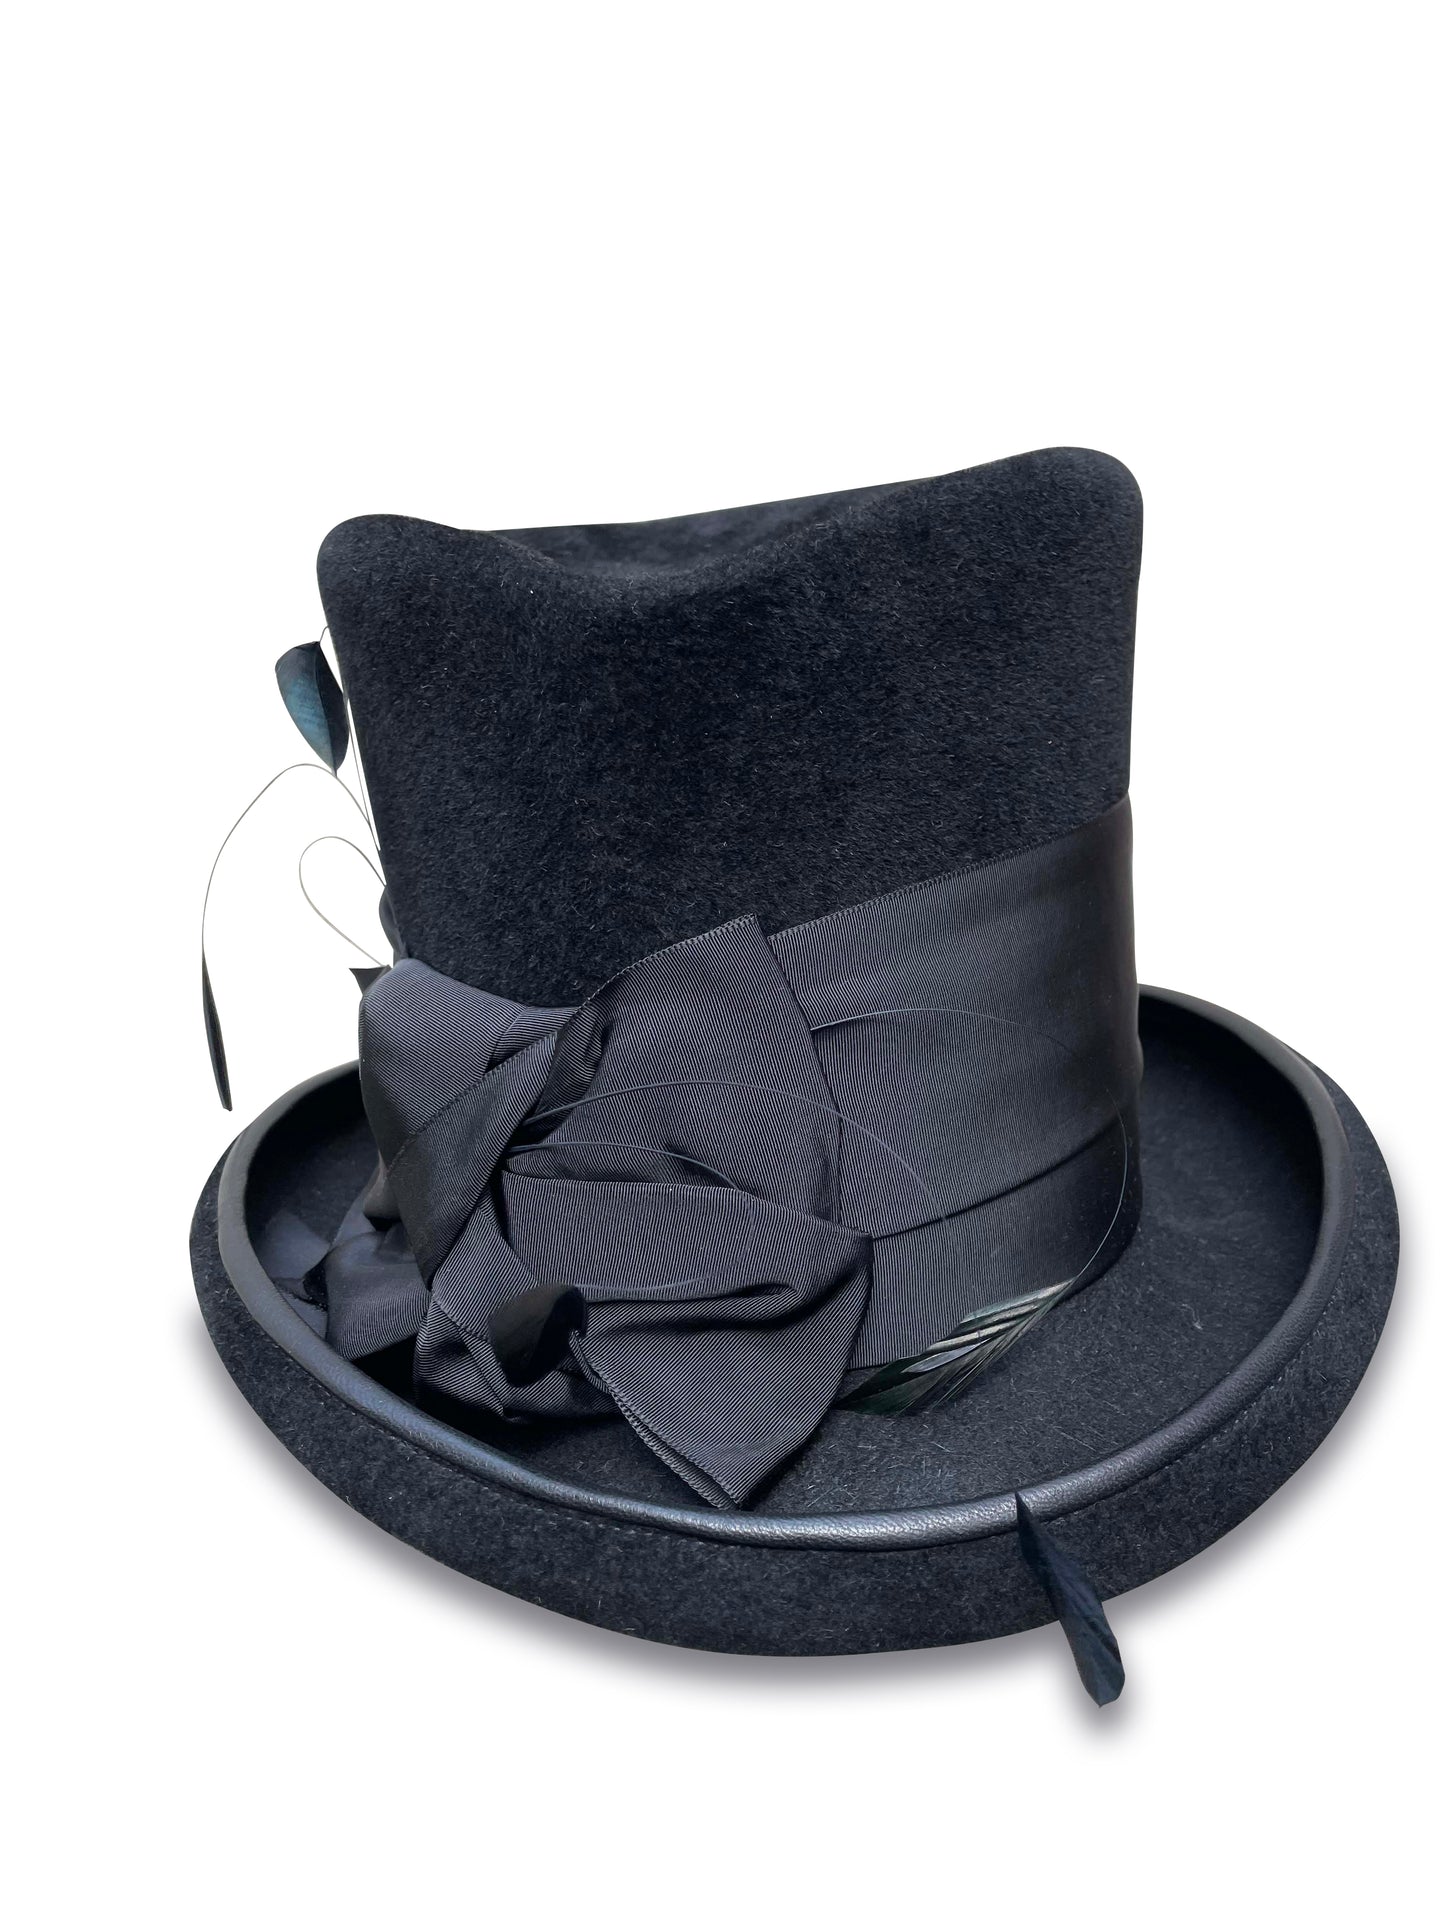 Ringmaster, a unique black top hat from Cha Cha's House of Ill Repute, a woman-owned millinery in New York City